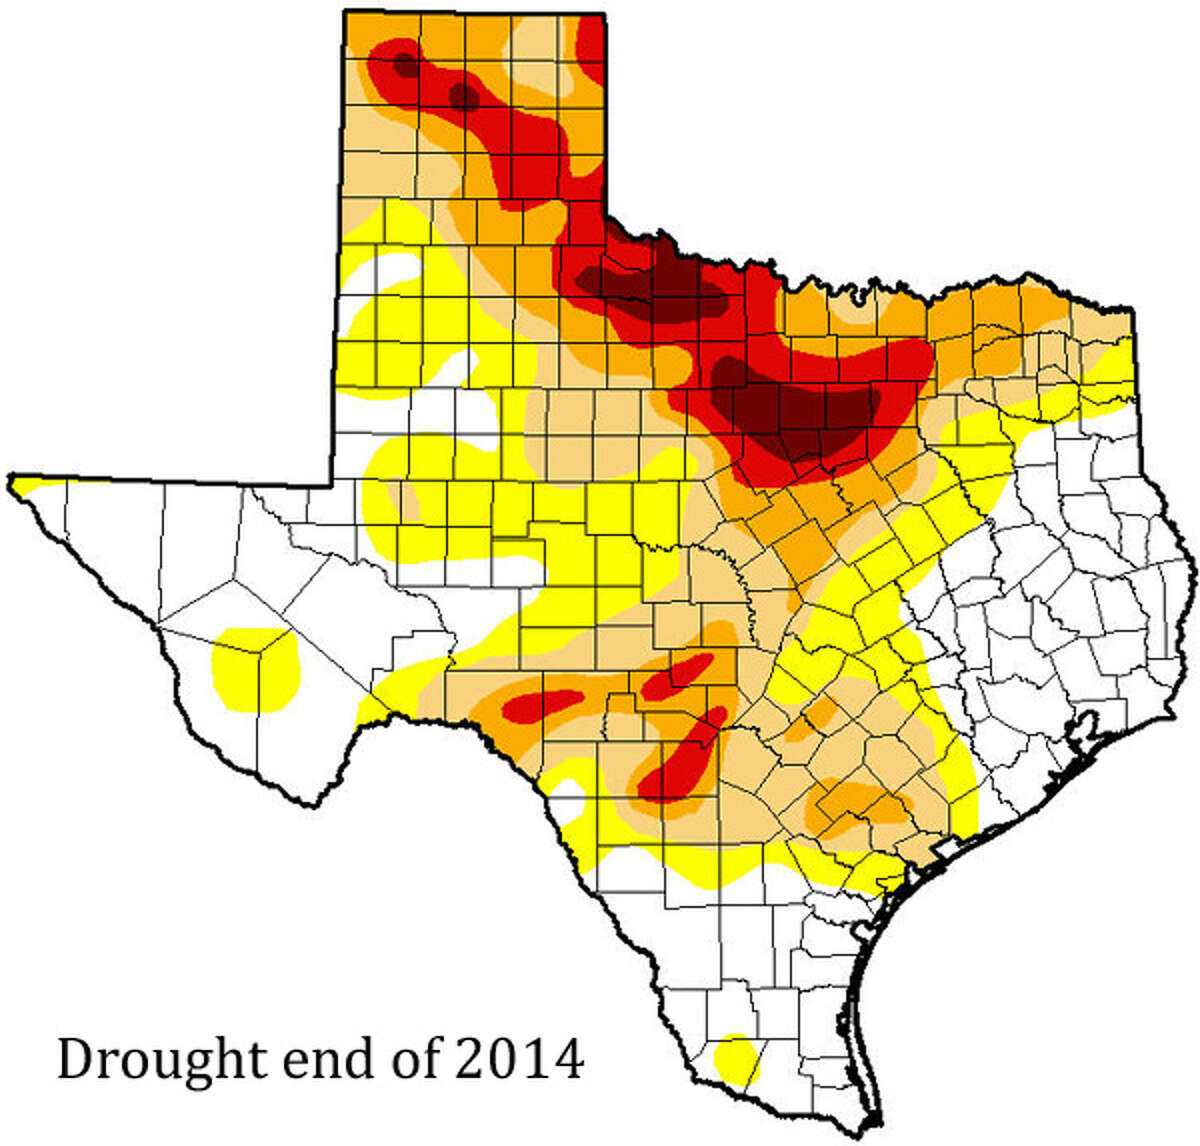 U.S. Drought Monitor map of Texas drought conditions as of Dec. 30, 2014.White areas reflect no drought presence, with darker colors reflecting worsening stages of drought from "Abnormally Dry" (yellow) to "Exceptional Drought" (brown).